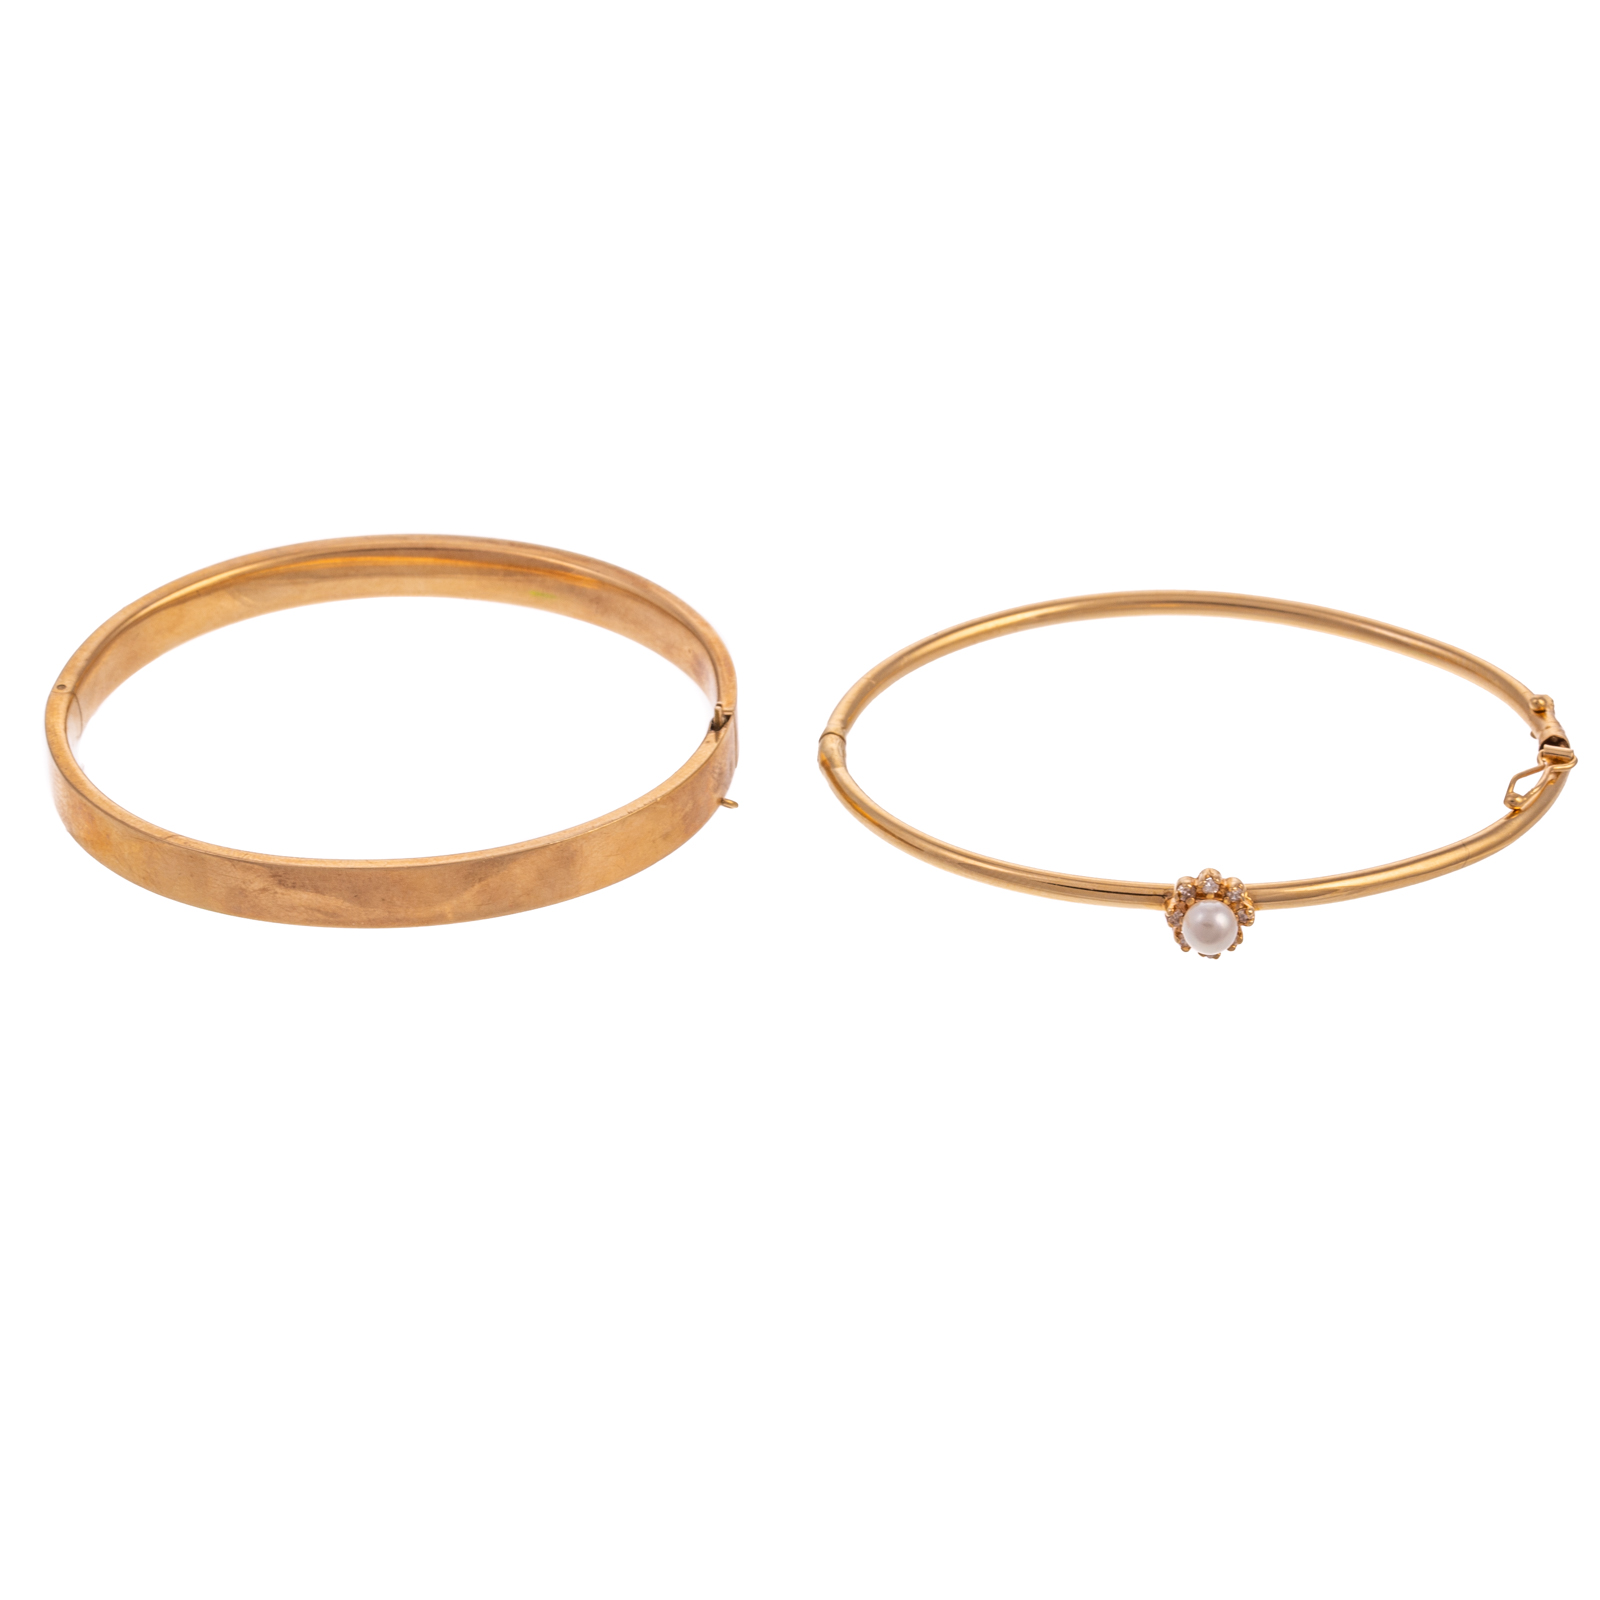 TWO 14K YELLOW GOLD BANGLES 1)